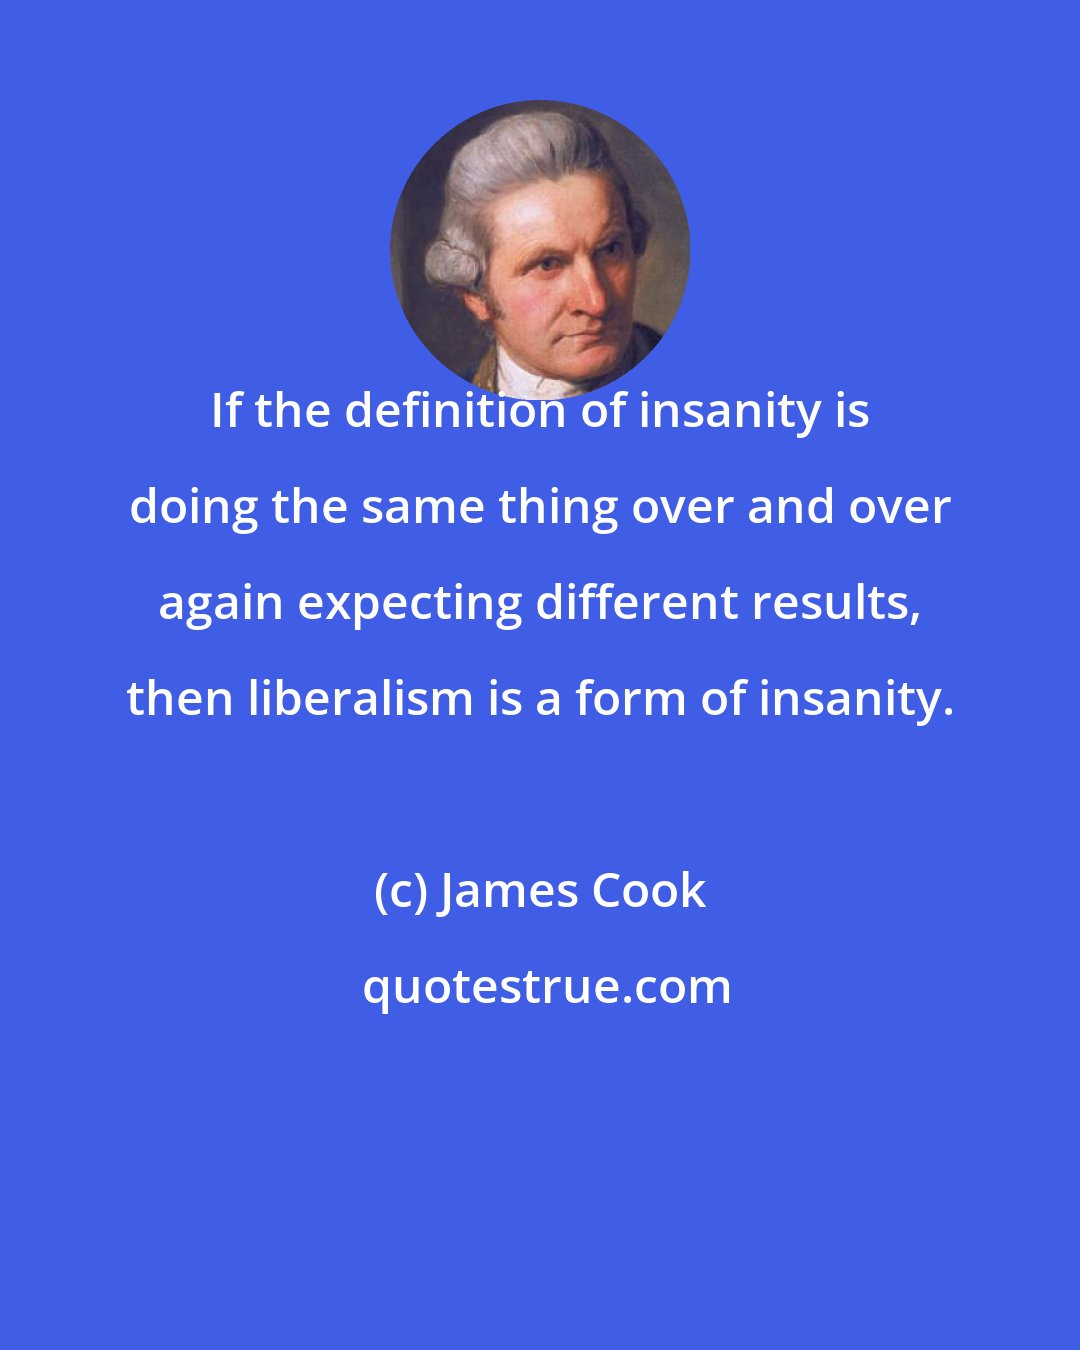 James Cook: If the definition of insanity is doing the same thing over and over again expecting different results, then liberalism is a form of insanity.